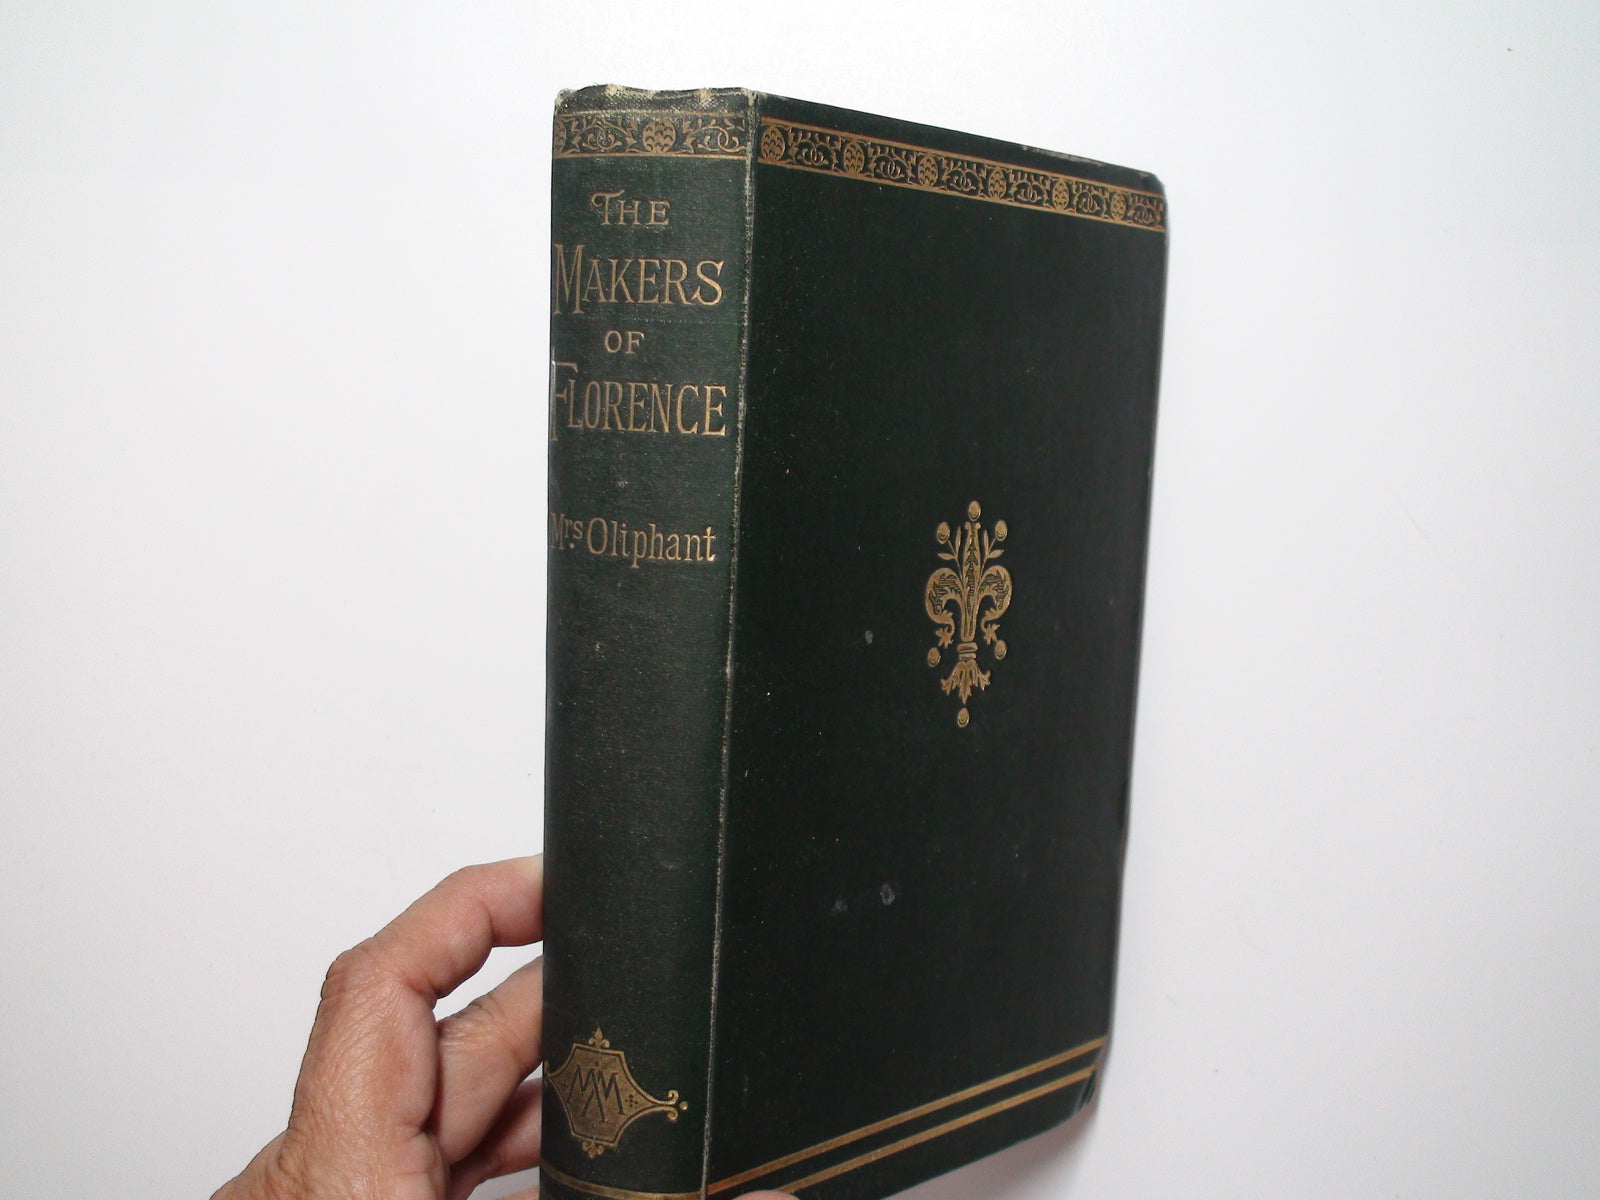 The Makers of Florence, by Mrs. Oliphant, Dante, Giotto, Savonarola, 1883